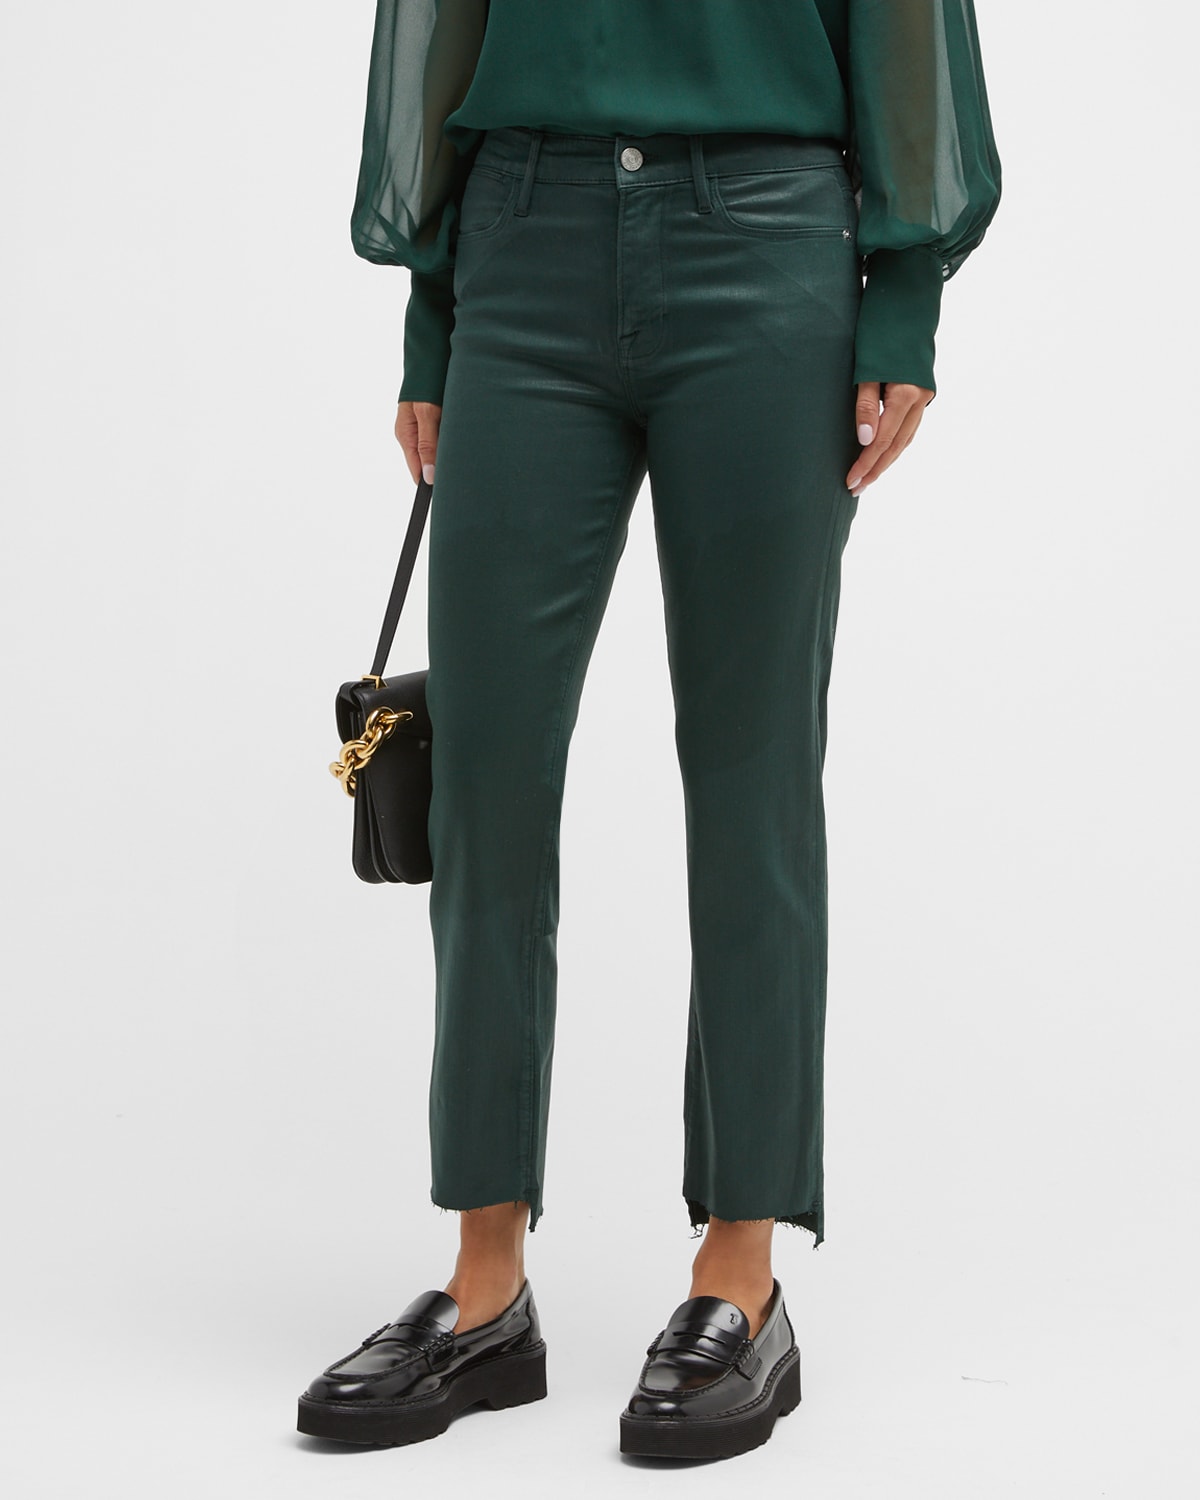 FRAME Le High Straight Slim Coated Ankle Jeans | Neiman Marcus